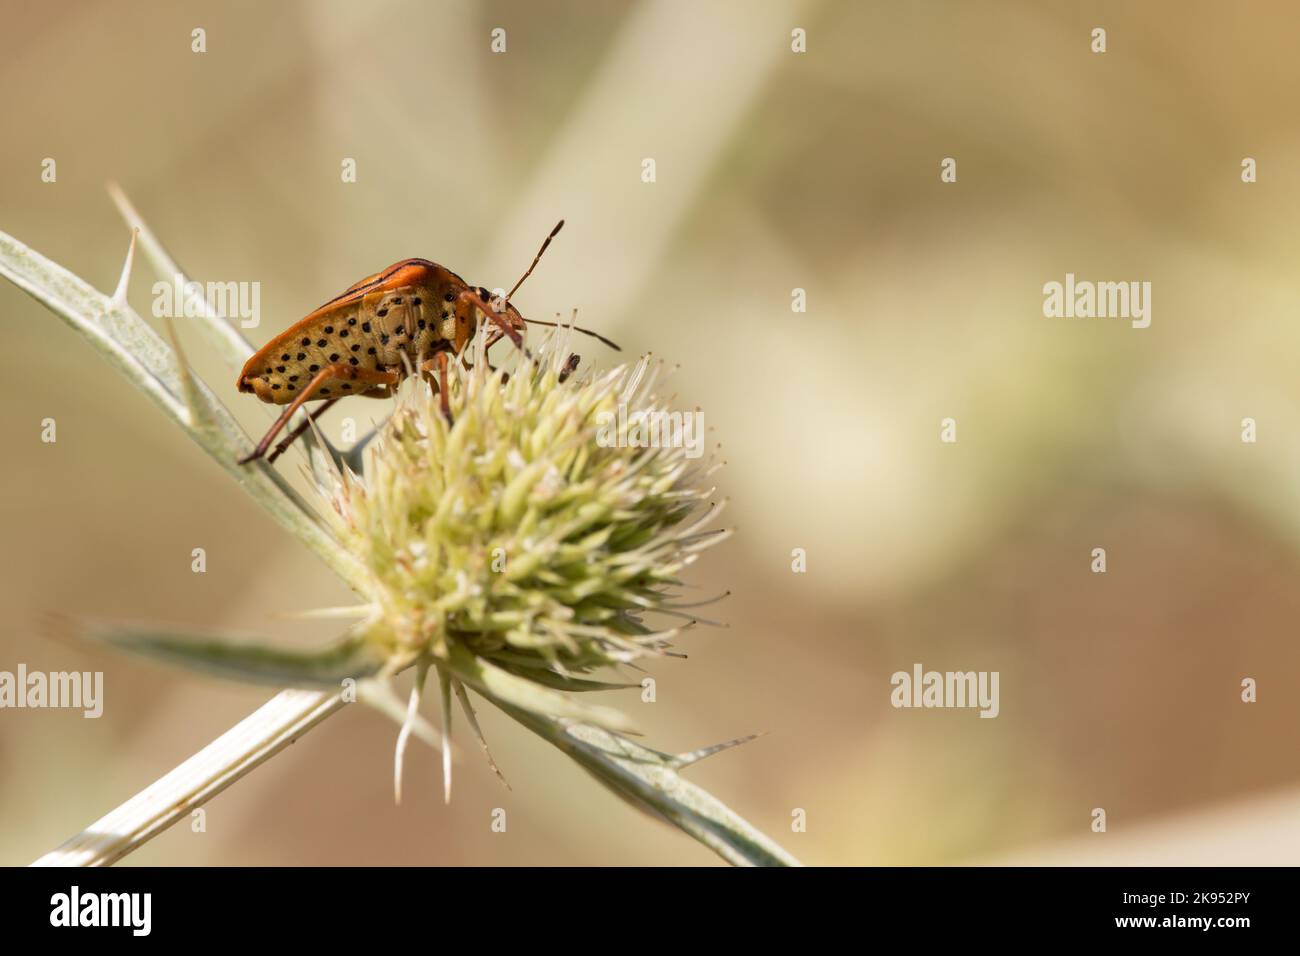 A macro shot of a spotted true bug on a clover flower Stock Photo